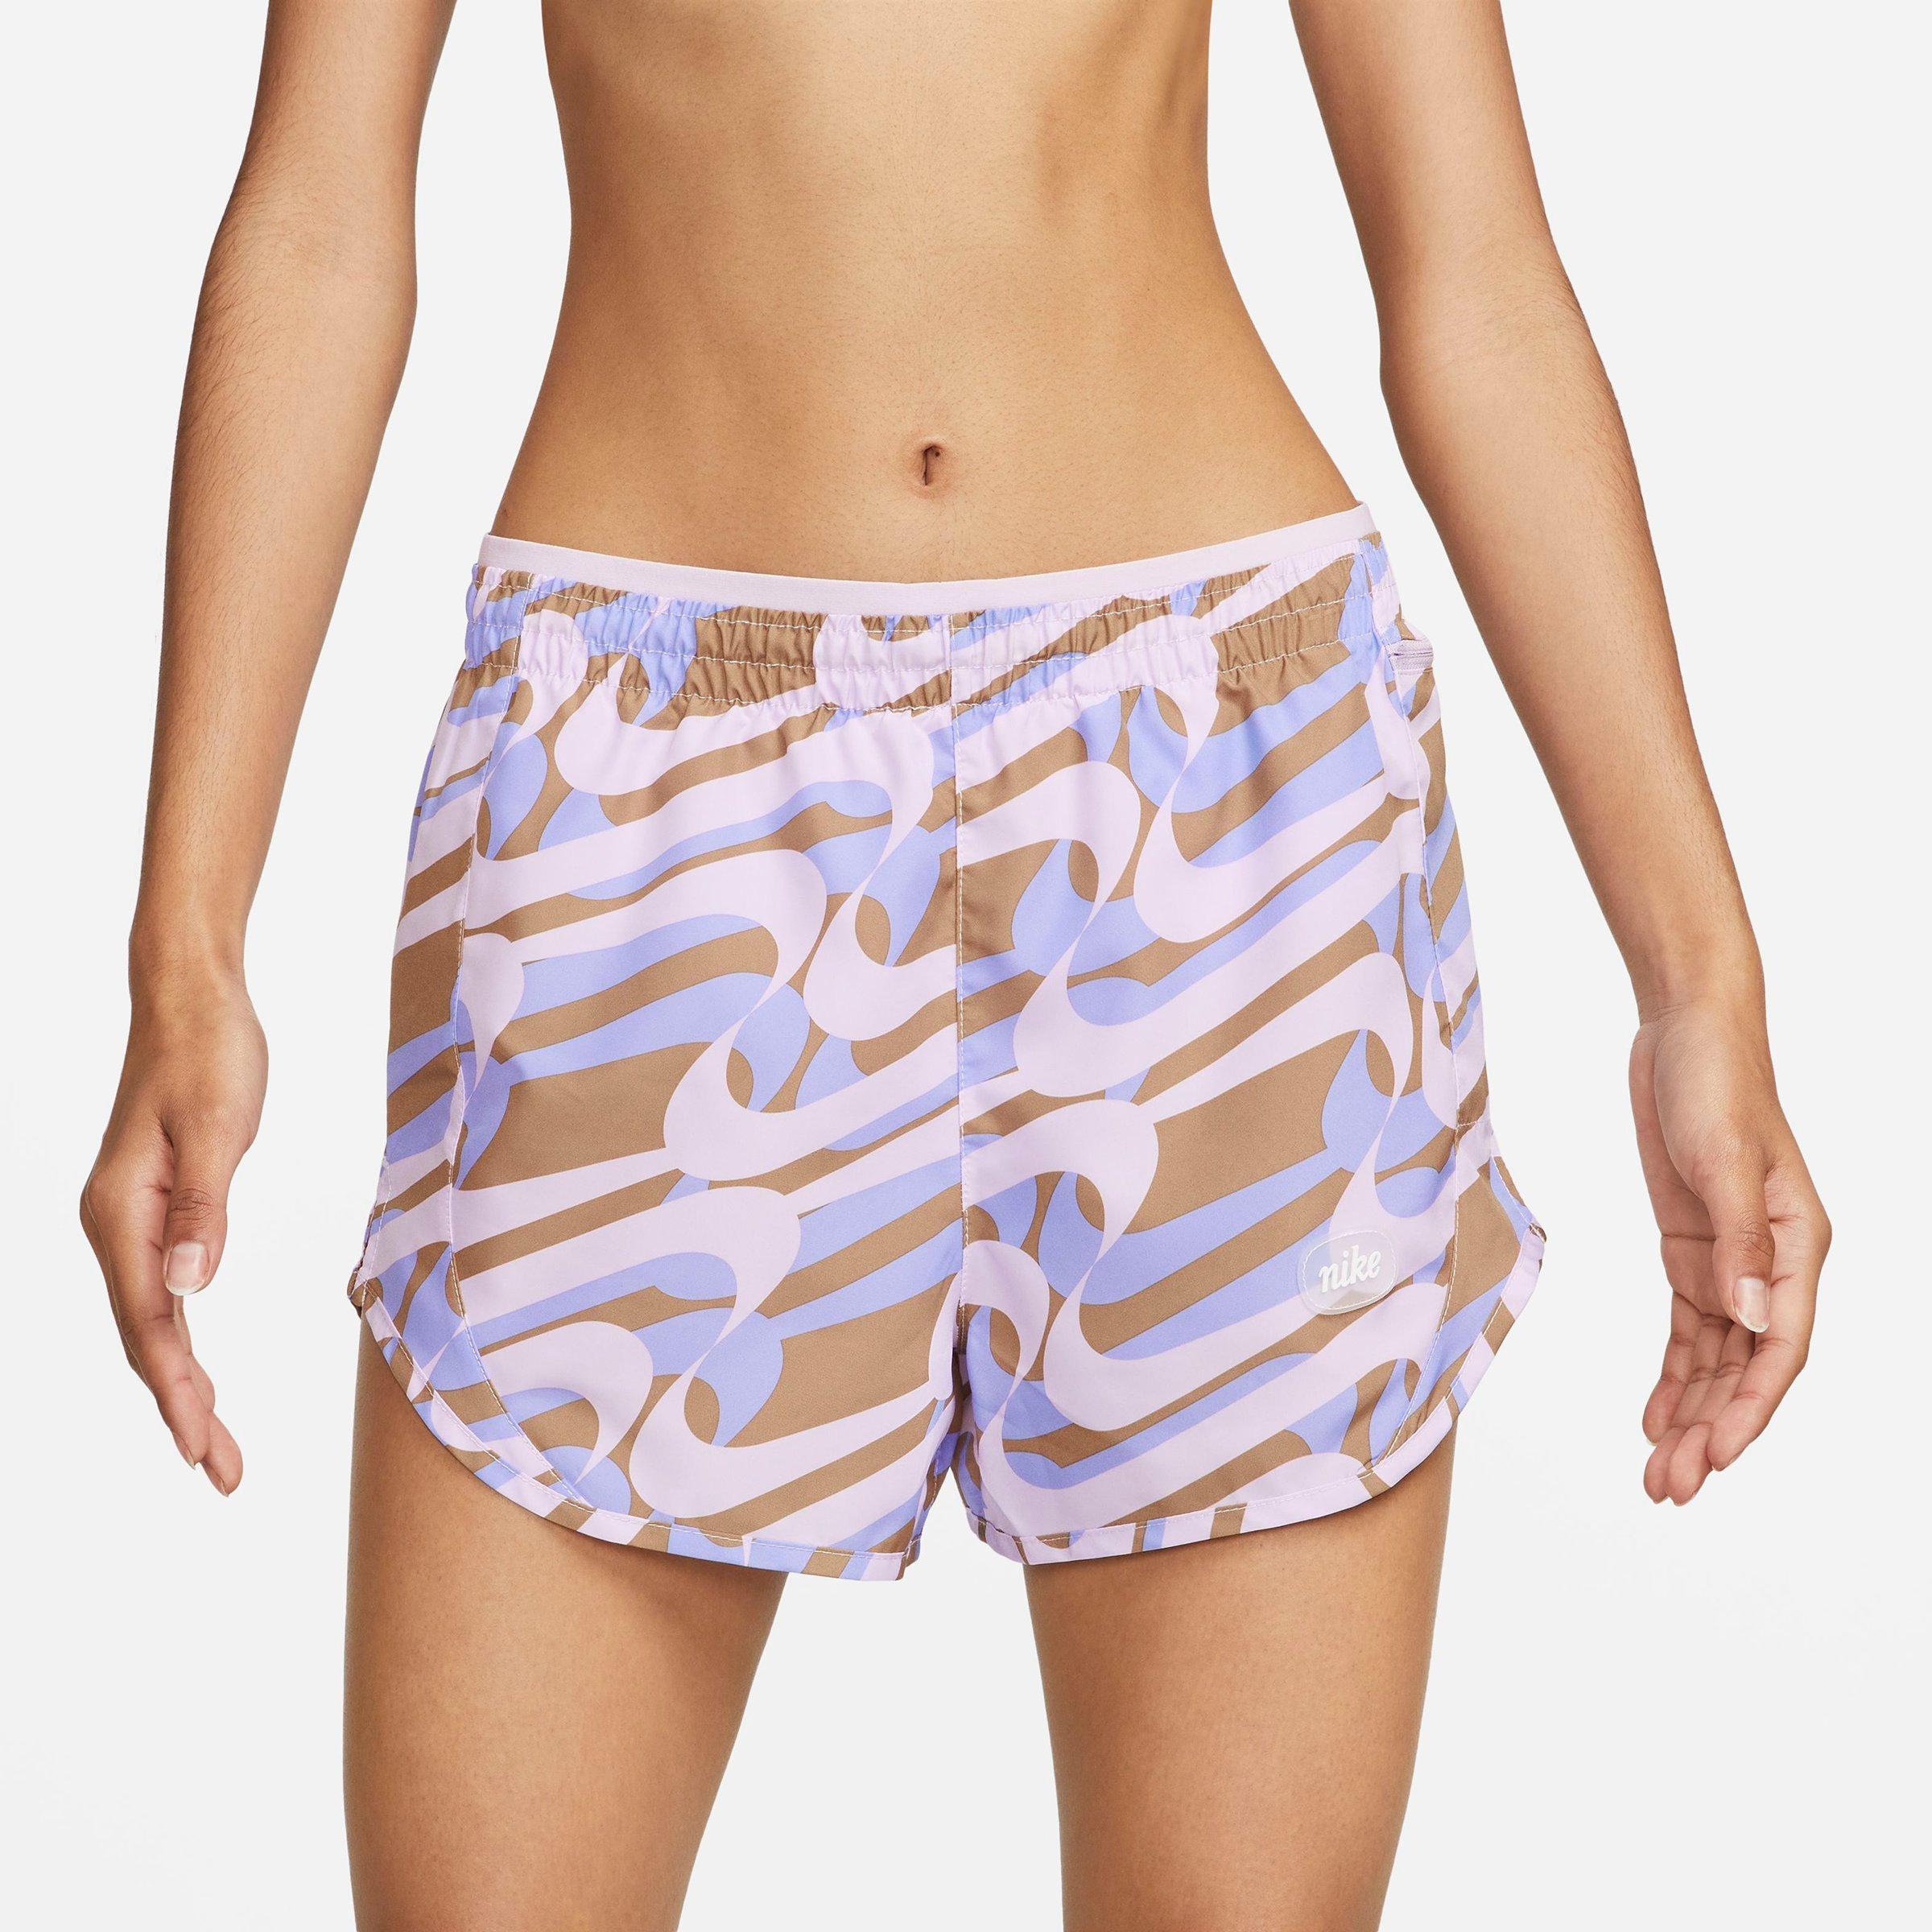 UPC 196149000015 product image for Nike Women's Dri-FIT Icon Clash Tempo Luxe Printed Running Shorts in Purple/Doll | upcitemdb.com